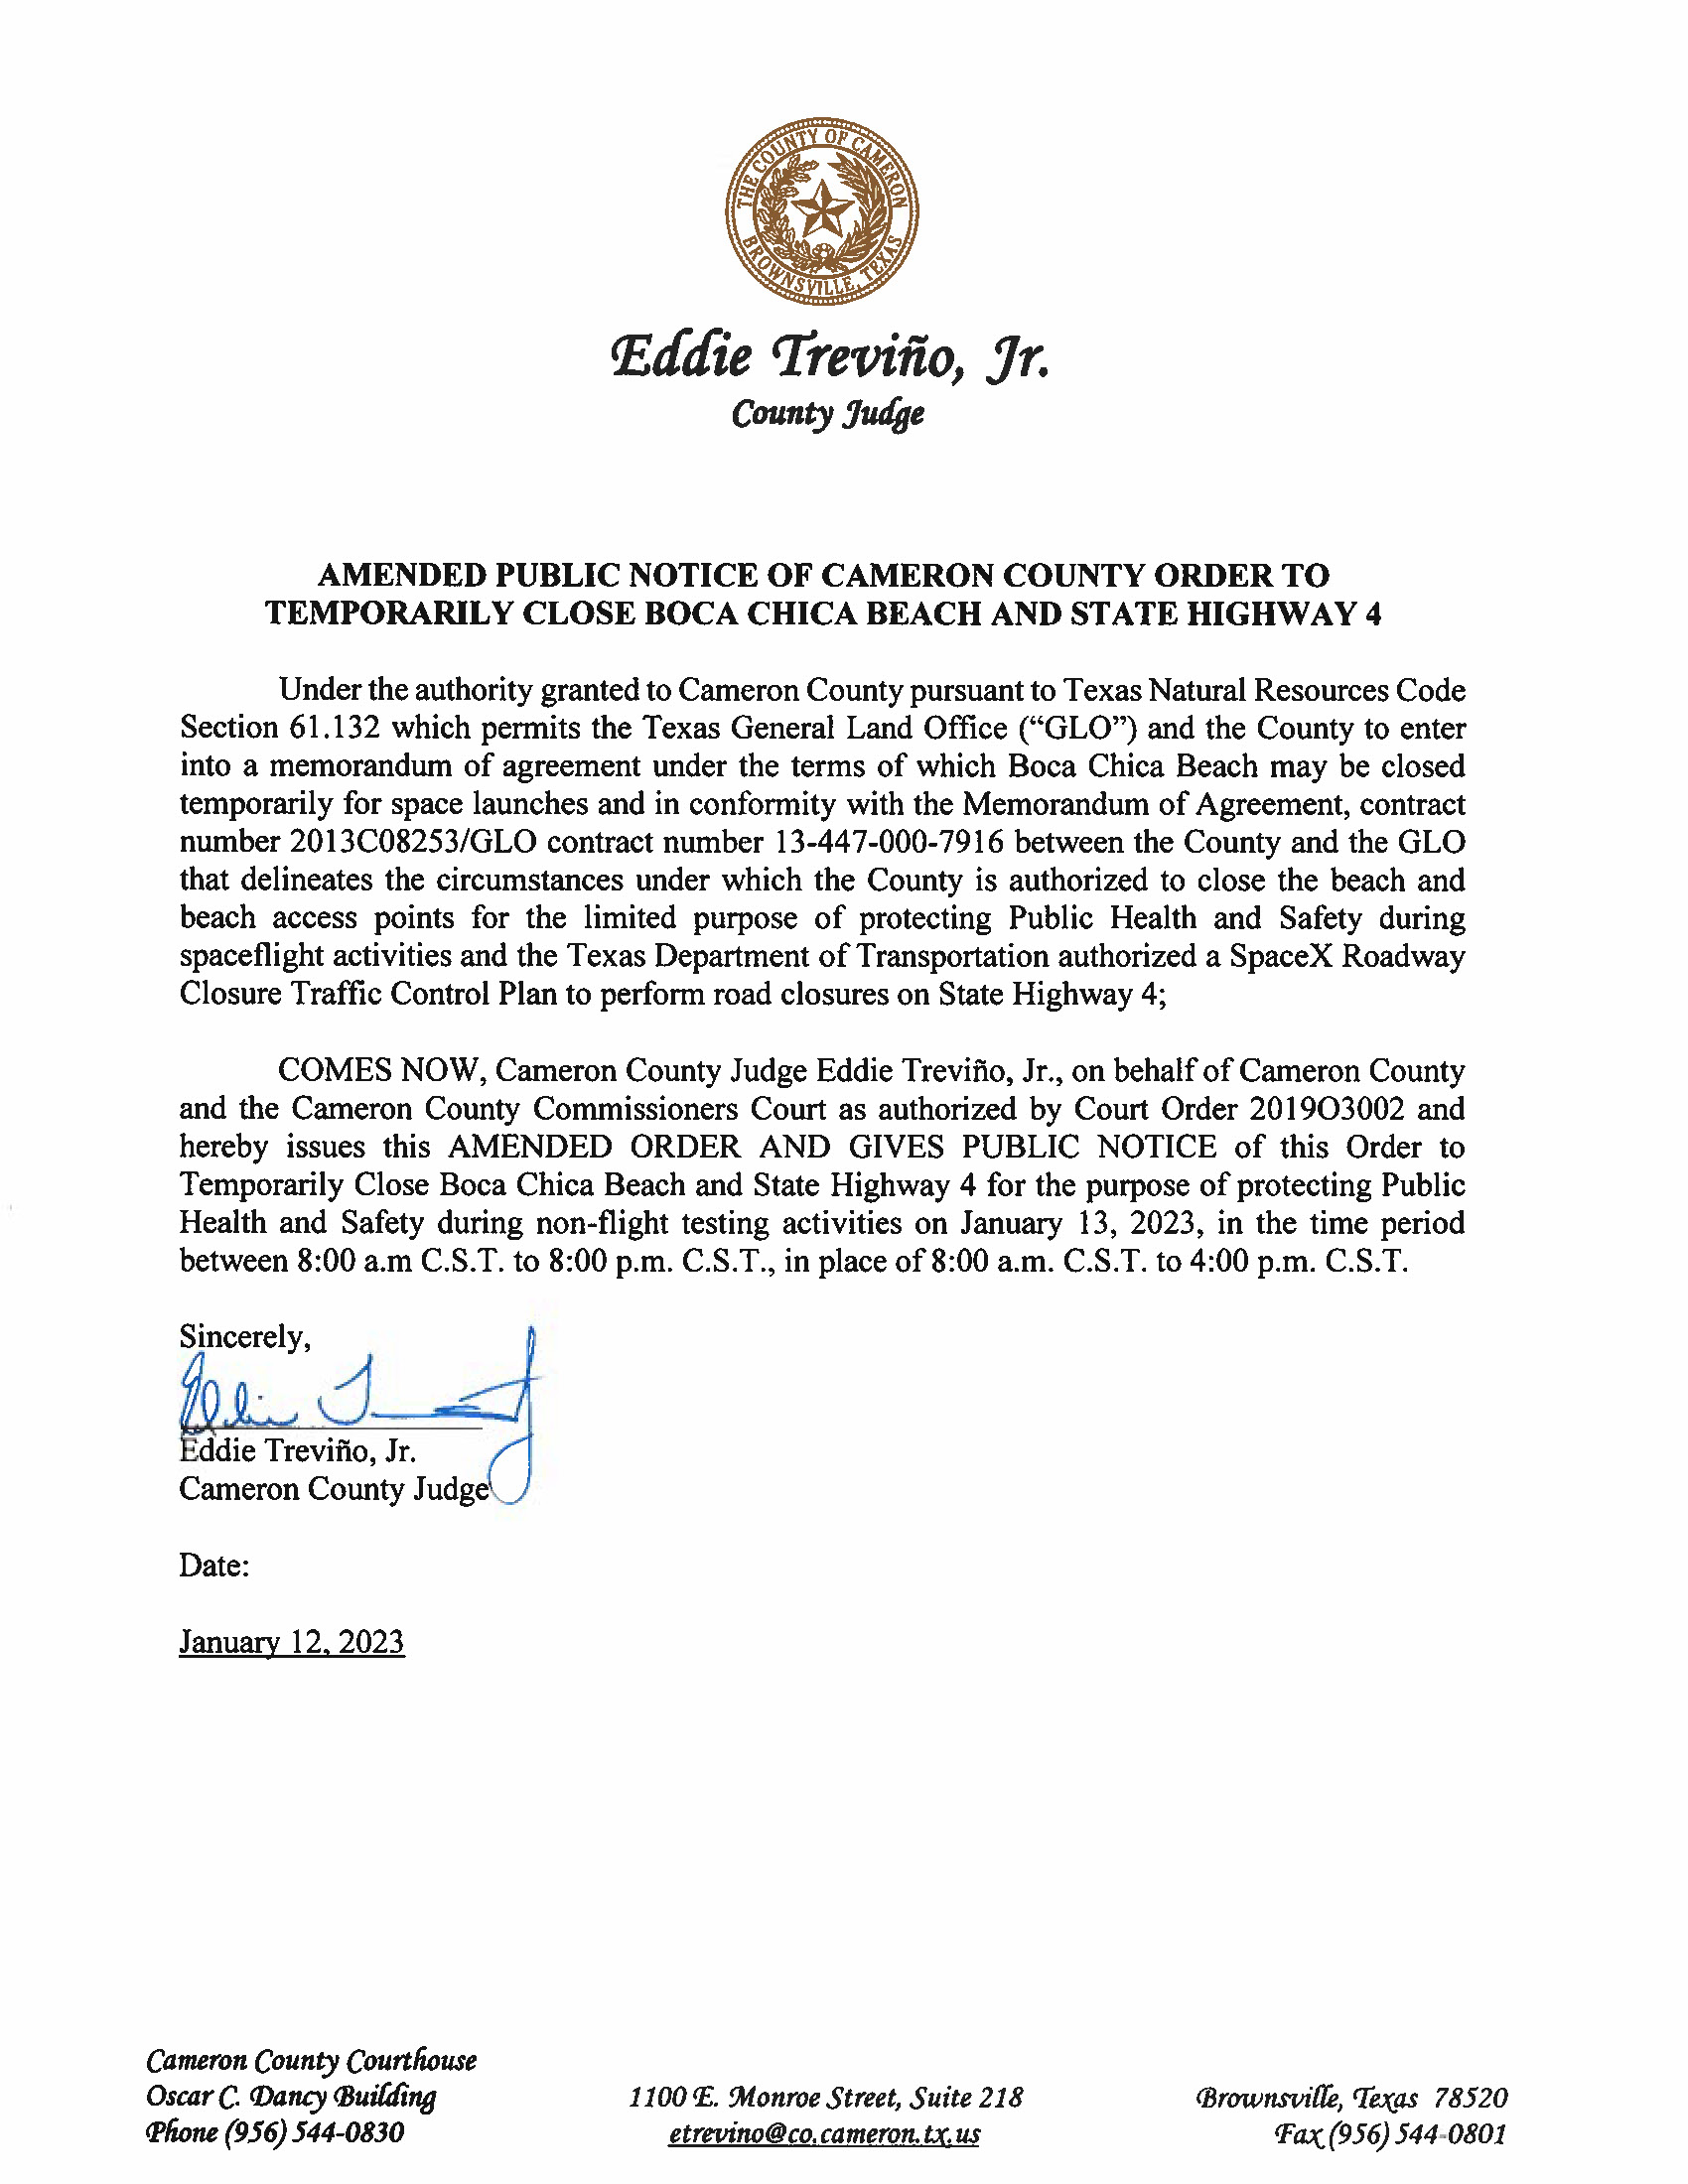 AMENDED PUBLIC NOTICE OF CAMERON COUNTY ORDER TO TEMP. BEACH CLOSURE AND HWY.01.13.2023